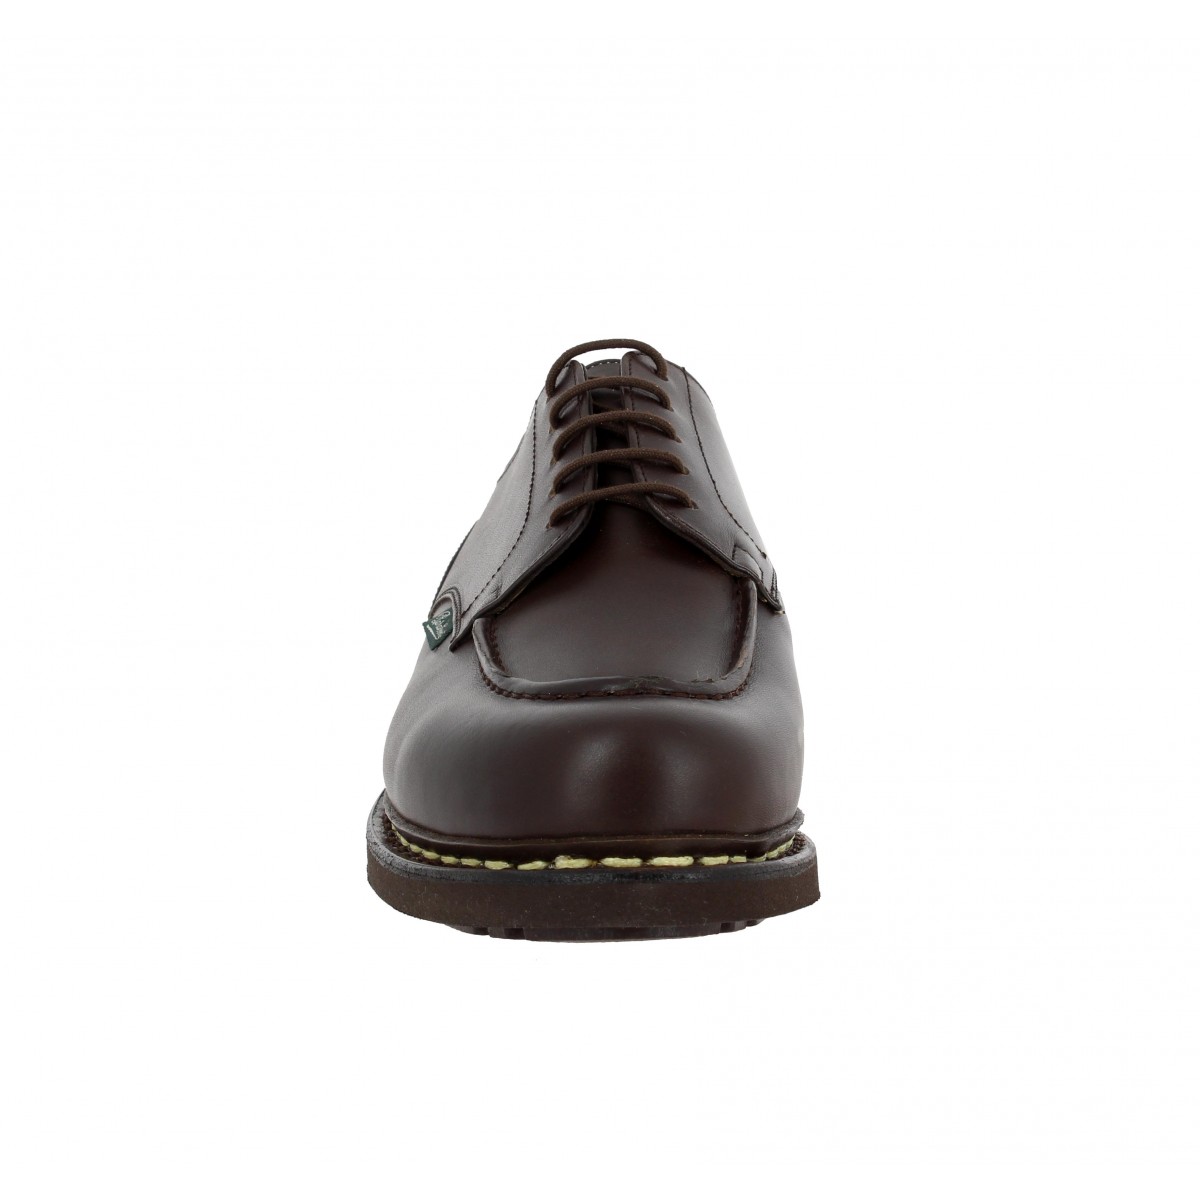 Paraboot chambord cuir homme cafe | Fanny chaussures